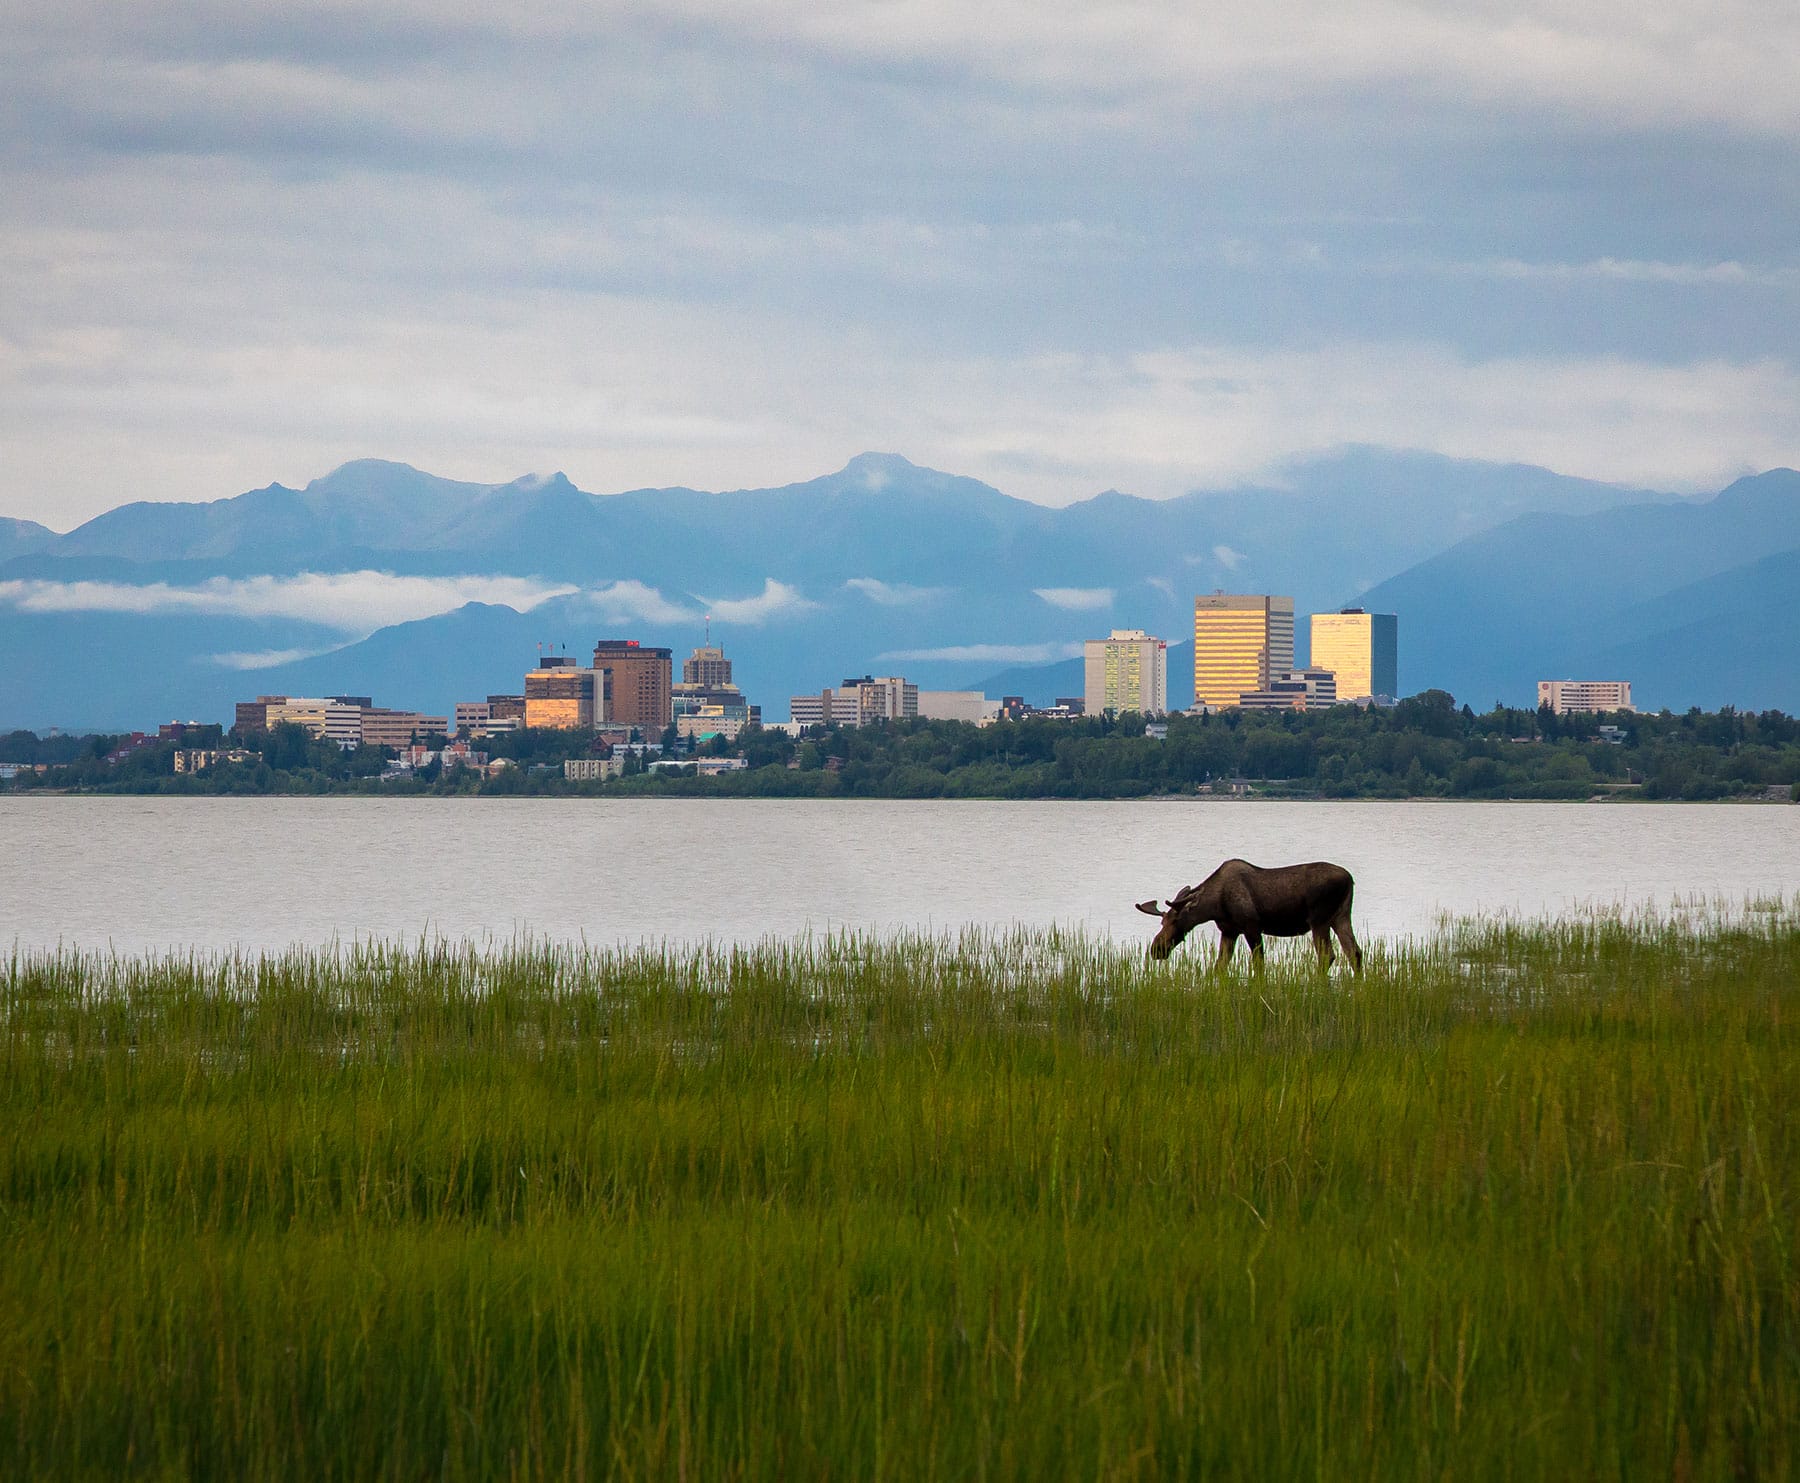 Anchorage Alaska with mountains and a moose